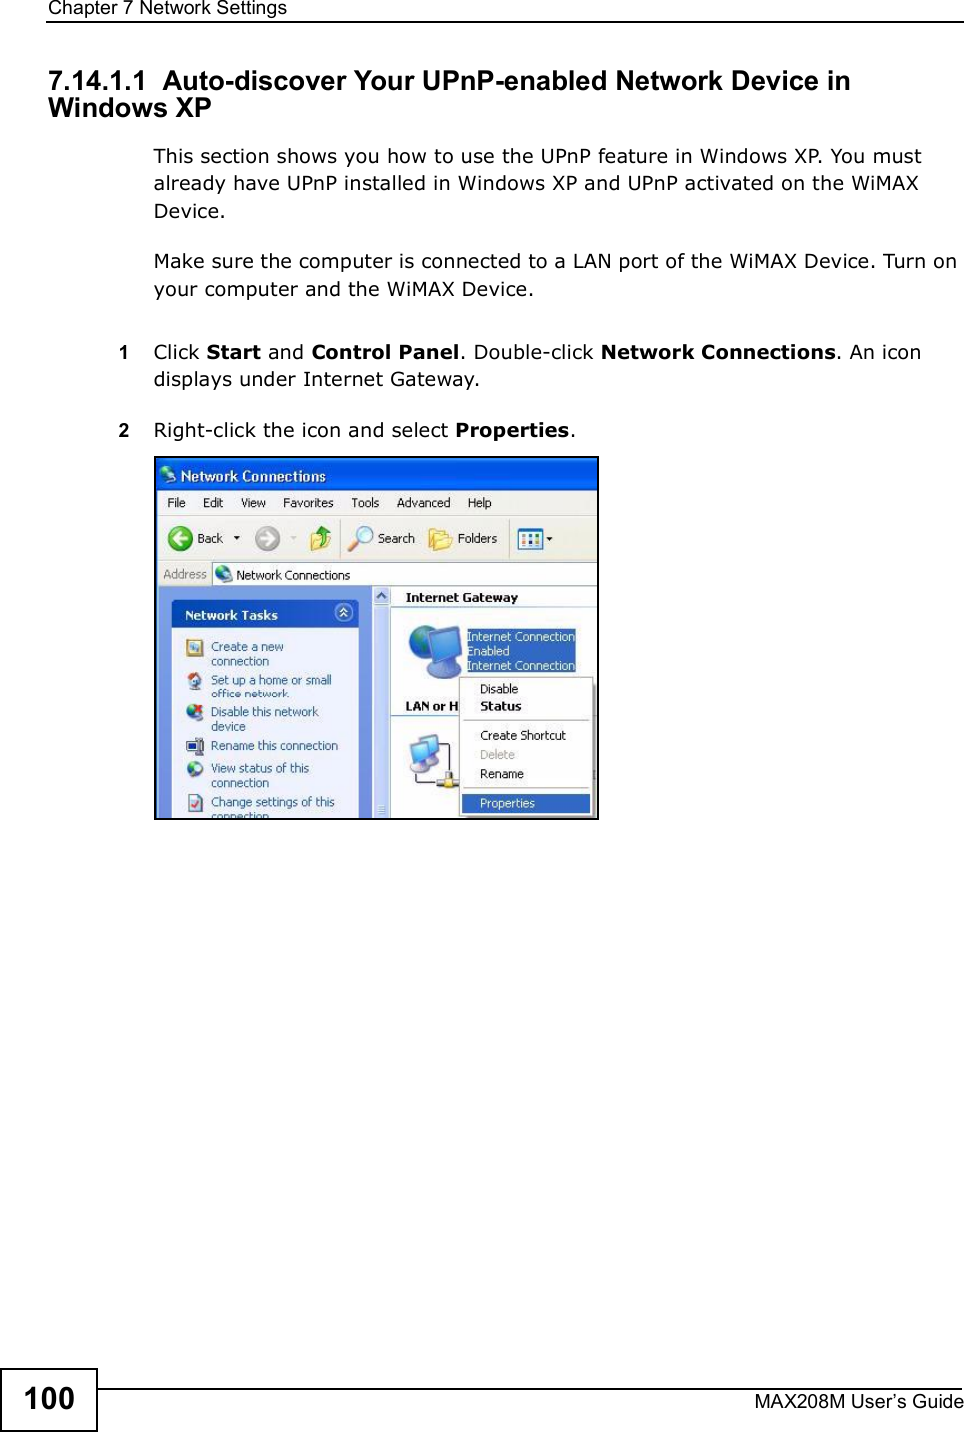 Chapter 7Network SettingsMAX208M User s Guide1007.14.1.1  Auto-discover Your UPnP-enabled Network Device in Windows XPThis section shows you how to use the UPnP feature in Windows XP. You must already have UPnP installed in Windows XP and UPnP activated on the WiMAX Device.Make sure the computer is connected to a LAN port of the WiMAX Device. Turn on your computer and the WiMAX Device. 1Click Start and Control Panel. Double-click Network Connections. An icon displays under Internet Gateway.2Right-click the icon and select Properties. 